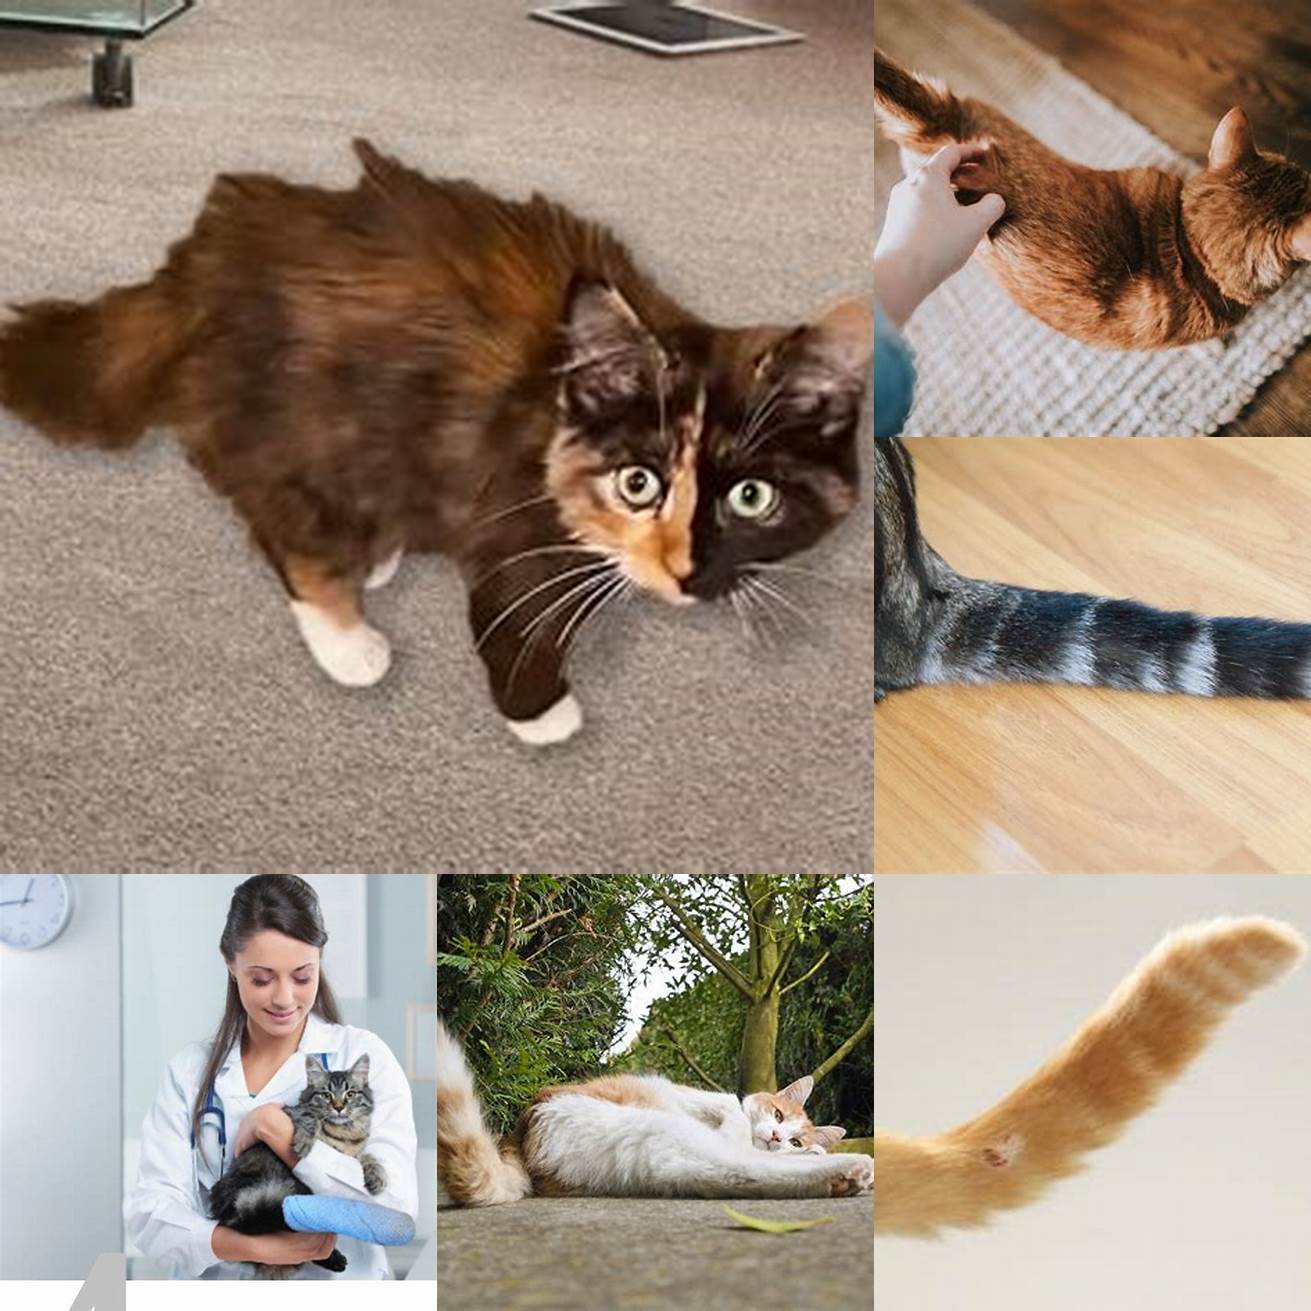 An injury can cause a cats tail to fall off